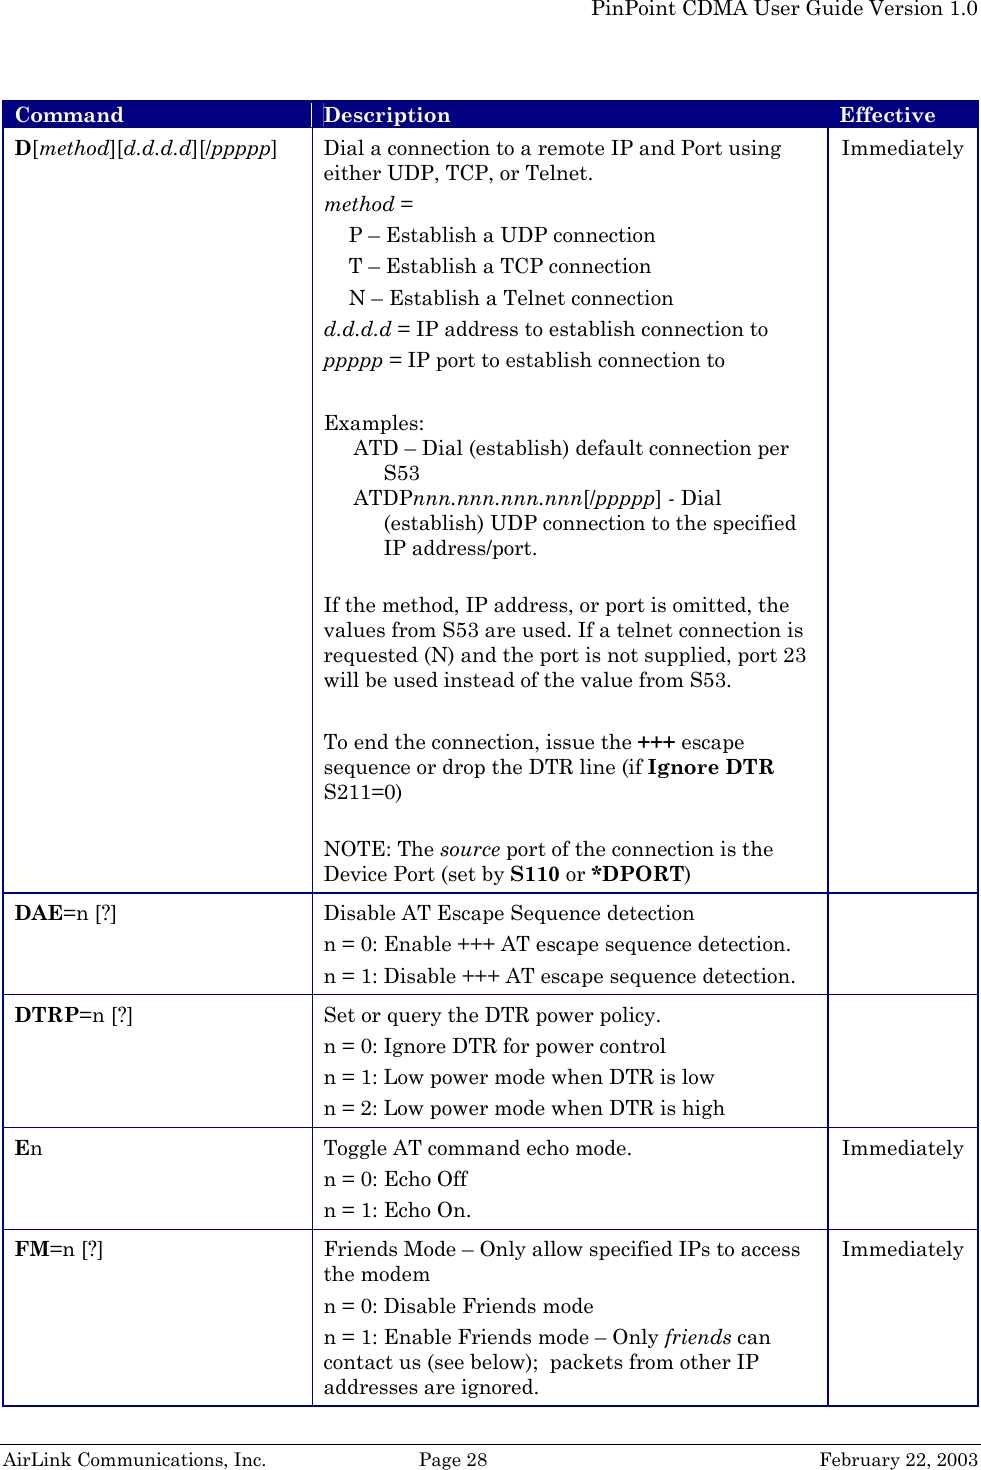   PinPoint CDMA User Guide Version 1.0   AirLink Communications, Inc.  Page 28  February 22, 2003 Command  Description  Effective D[method][d.d.d.d][/ppppp]  Dial a connection to a remote IP and Port using either UDP, TCP, or Telnet. method = P – Establish a UDP connection T – Establish a TCP connection N – Establish a Telnet connection d.d.d.d = IP address to establish connection to ppppp = IP port to establish connection to  Examples: ATD – Dial (establish) default connection per S53 ATDPnnn.nnn.nnn.nnn[/ppppp] - Dial (establish) UDP connection to the specified IP address/port.  If the method, IP address, or port is omitted, the values from S53 are used. If a telnet connection is requested (N) and the port is not supplied, port 23 will be used instead of the value from S53.  To end the connection, issue the +++ escape sequence or drop the DTR line (if Ignore DTR S211=0)  NOTE: The source port of the connection is the Device Port (set by S110 or *DPORT) Immediately DAE=n [?]  Disable AT Escape Sequence detection n = 0: Enable +++ AT escape sequence detection. n = 1: Disable +++ AT escape sequence detection.  DTRP=n [?]  Set or query the DTR power policy. n = 0: Ignore DTR for power control n = 1: Low power mode when DTR is low n = 2: Low power mode when DTR is high  En  Toggle AT command echo mode. n = 0: Echo Off n = 1: Echo On. Immediately FM=n [?]  Friends Mode – Only allow specified IPs to access the modem n = 0: Disable Friends mode n = 1: Enable Friends mode – Only friends can contact us (see below);  packets from other IP addresses are ignored. Immediately 